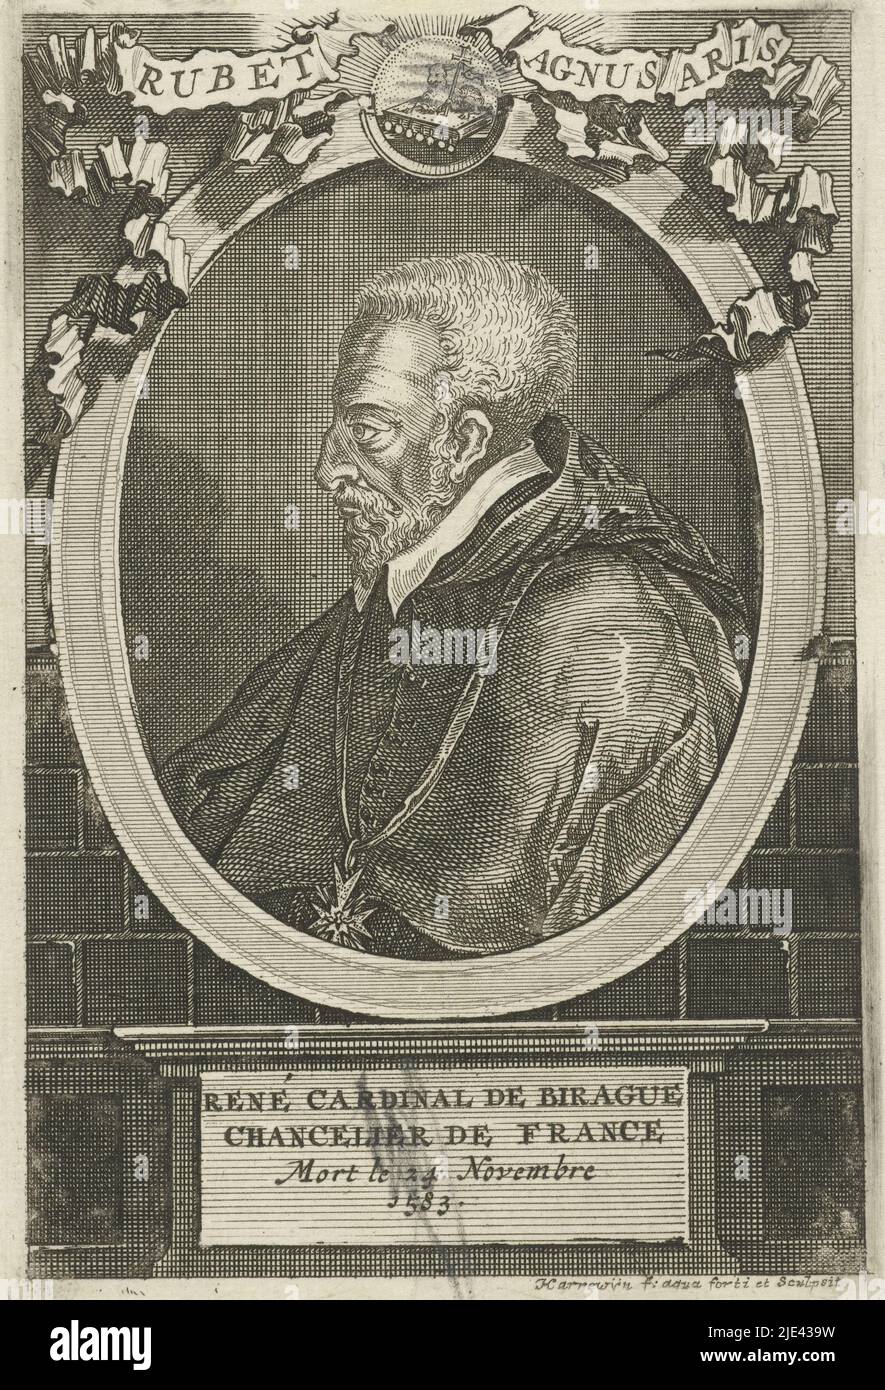 Portrait of Rene de Birague, Jacobus Harrewijn, 1682 - 1730, Bust to the left of Rene de Birague in an oval. Above the portrait an image of the Lamb of God lying on a book with the motto: Rubet agnus aris. Below the portrait four lines in French., print maker: Jacobus Harrewijn, (mentioned on object), print maker: Pieter van Gunst, (rejected attribution), Low Countries, 1682 - 1730, paper, etching, engraving, h 142 mm × w 94 mm Stock Photo